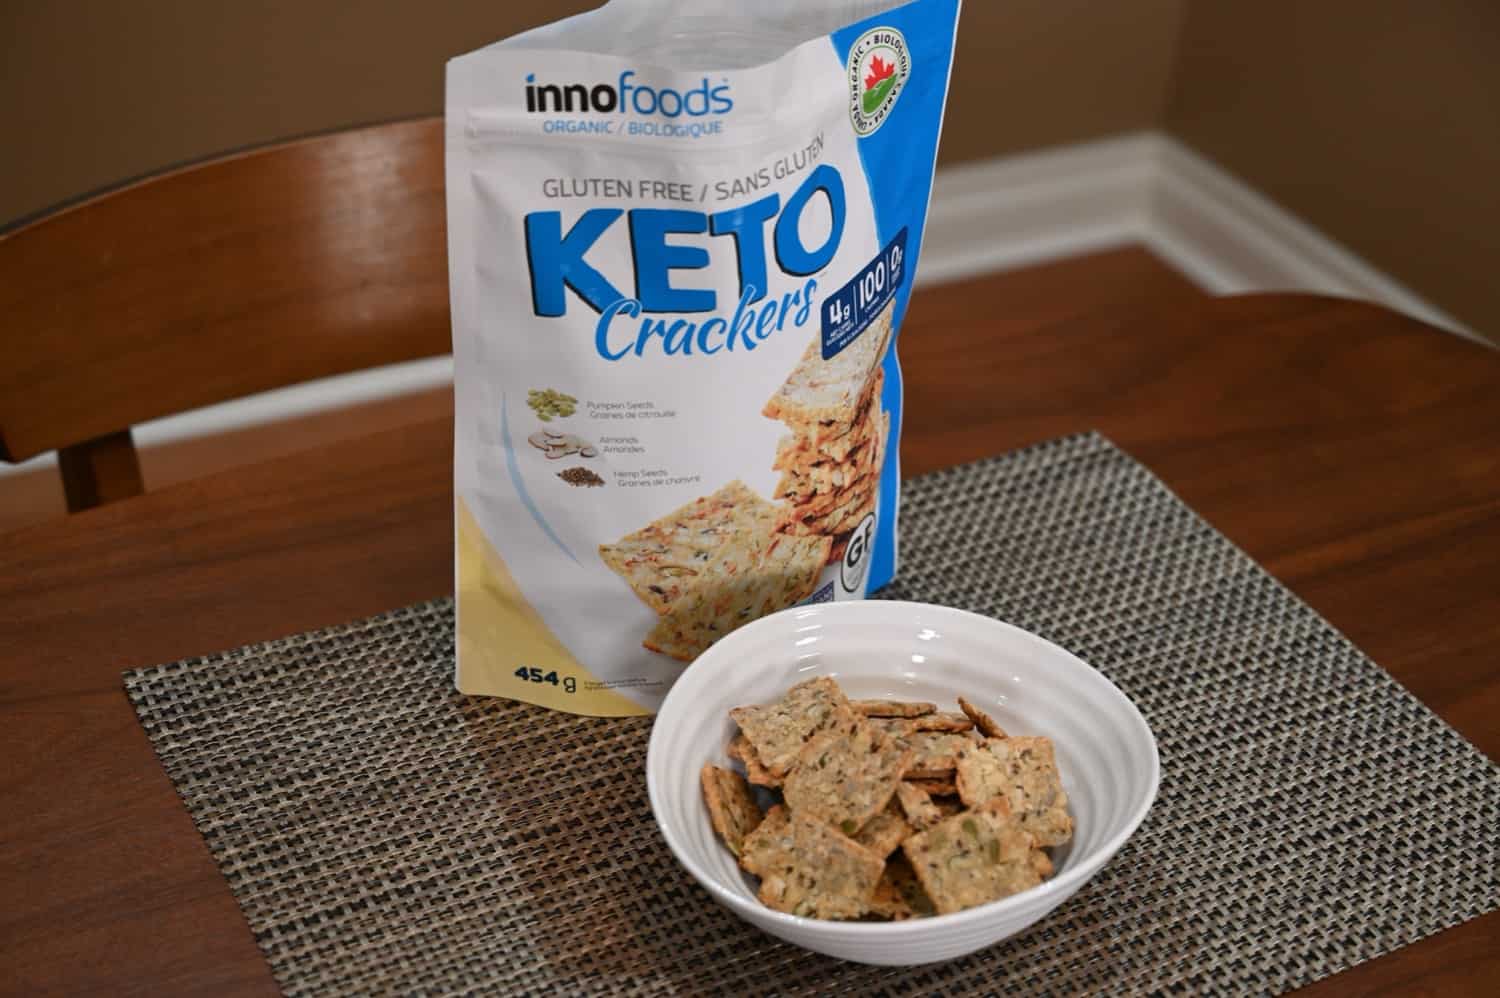 A bowl of the innofoods Keto Crackers in front of the bag.